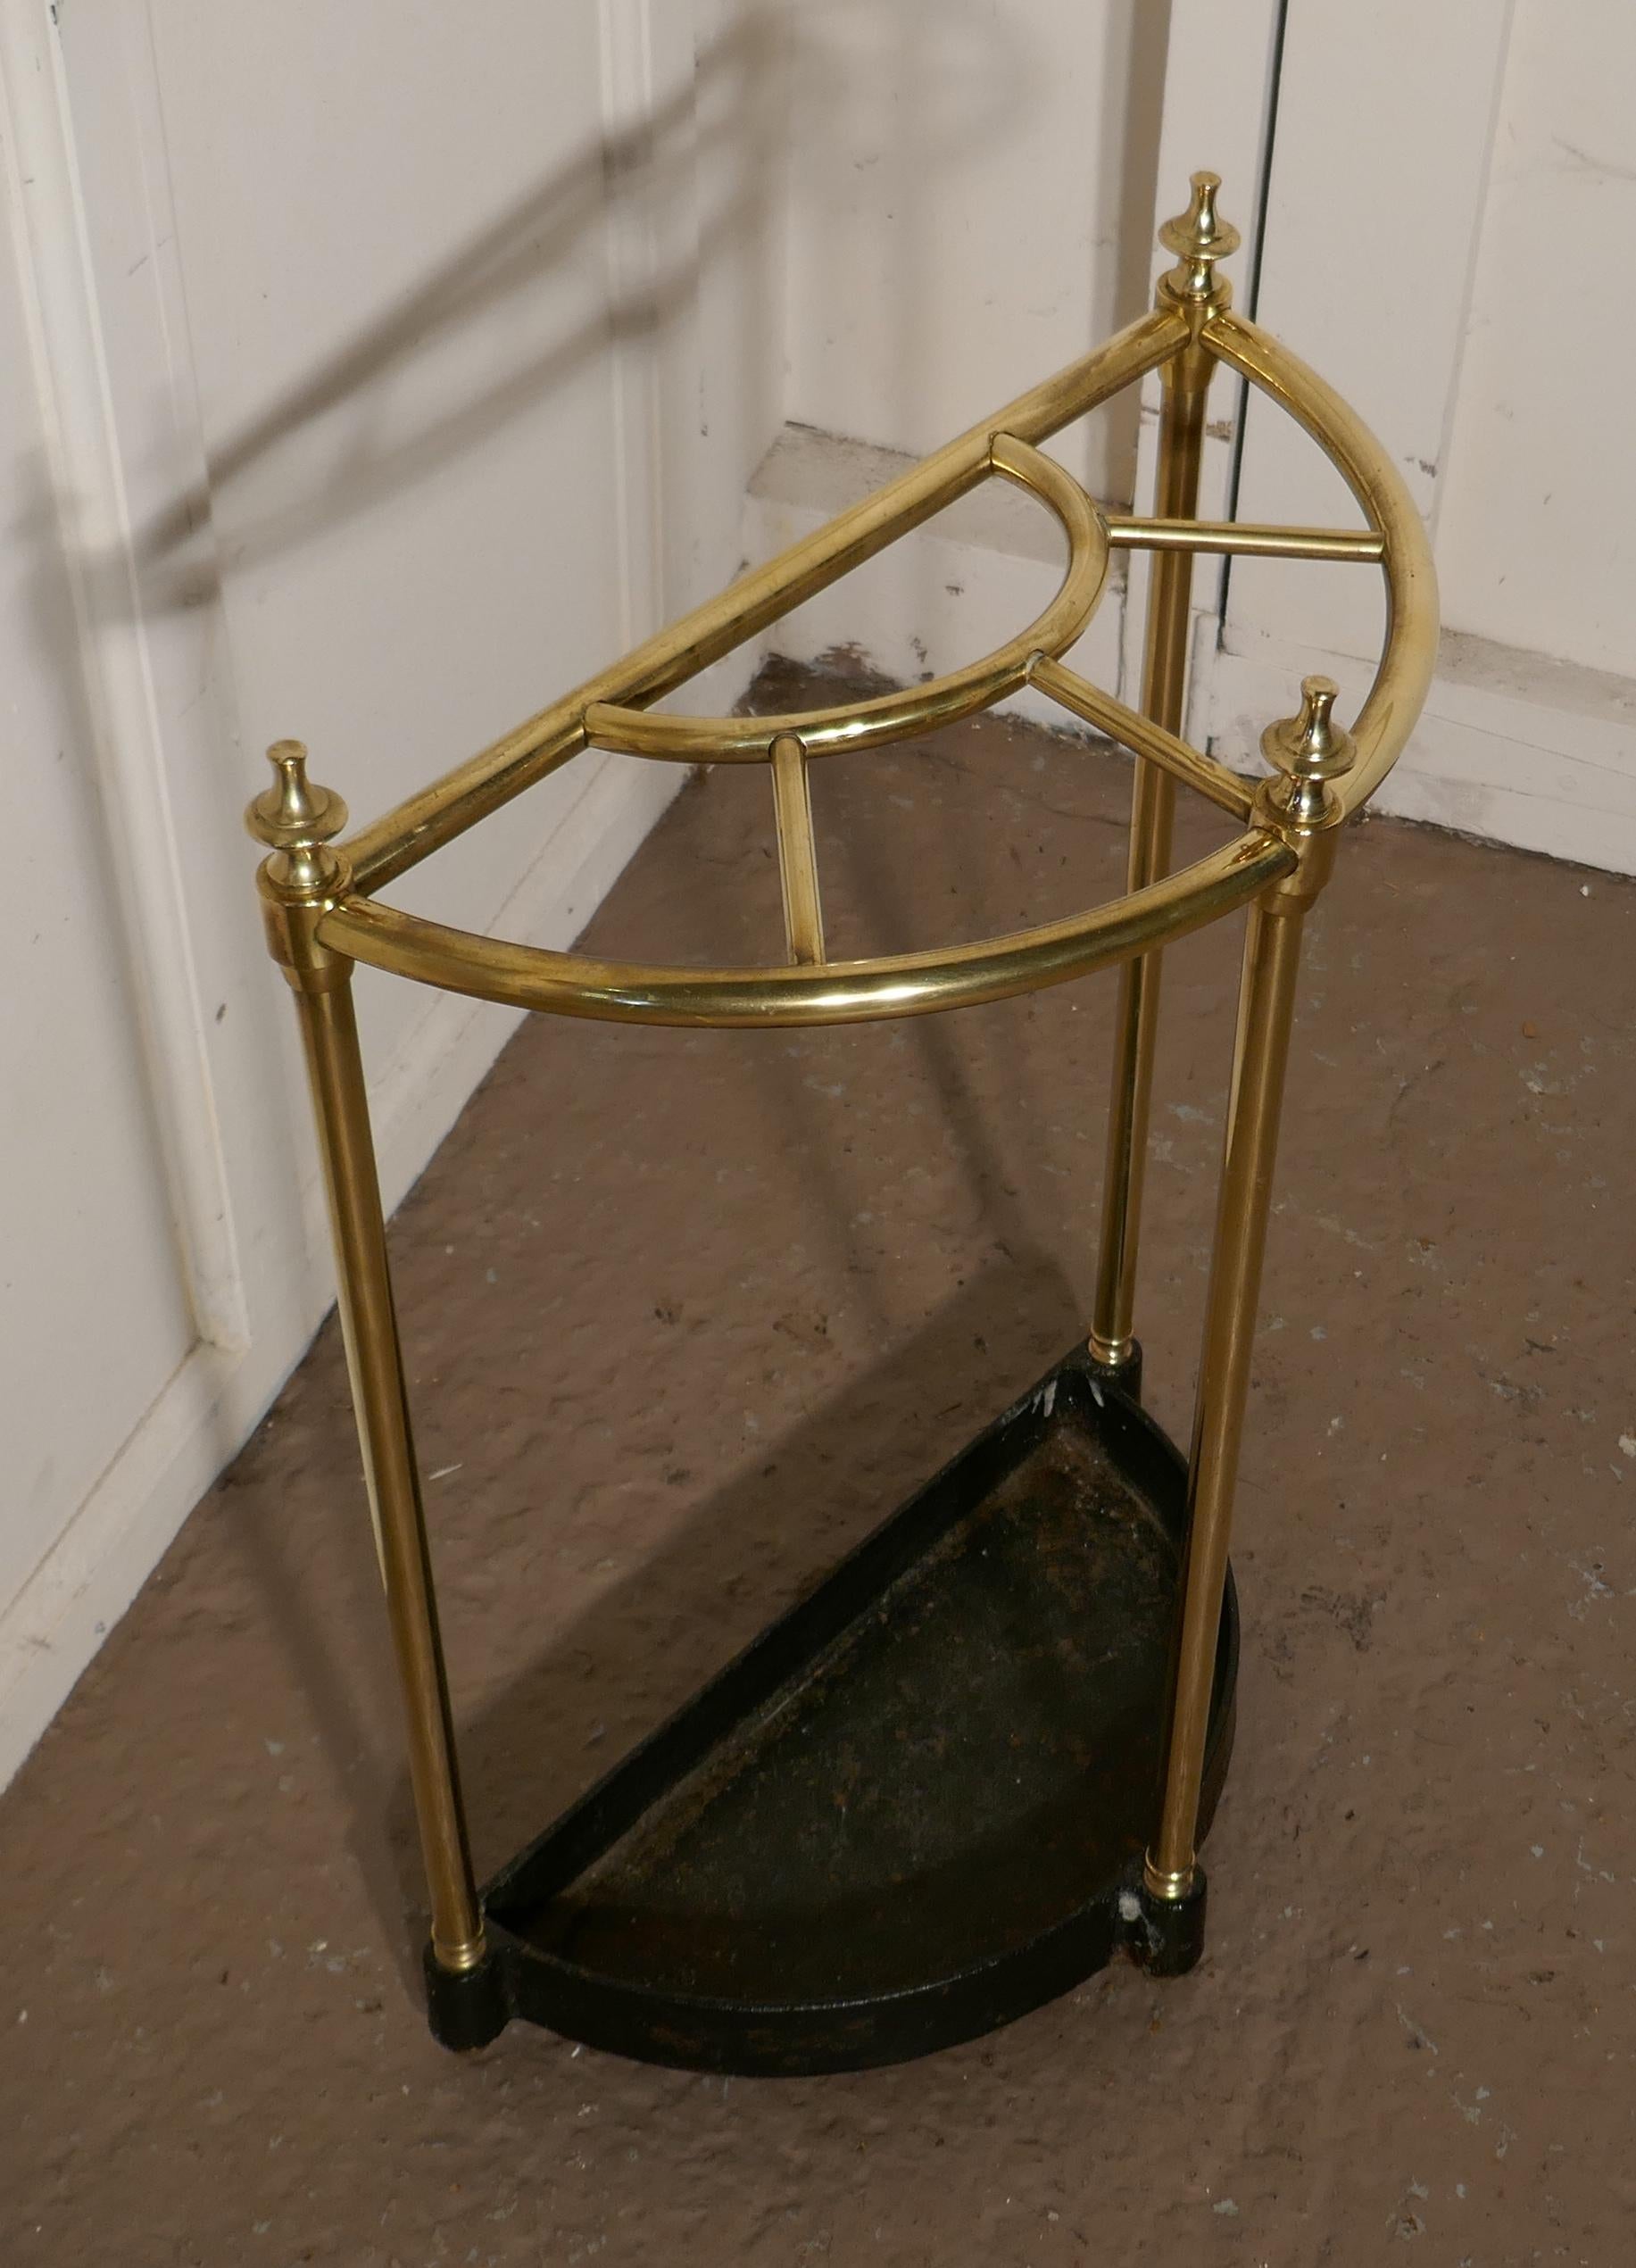 Victorian half round steel & iron stick stand or umbrella stand
A charming piece, and it has a very unusual half moon shape, the steel stand is divided into 5 sections to hold either Walking Sticks or Umbrellas and topped of with brass knobs, the